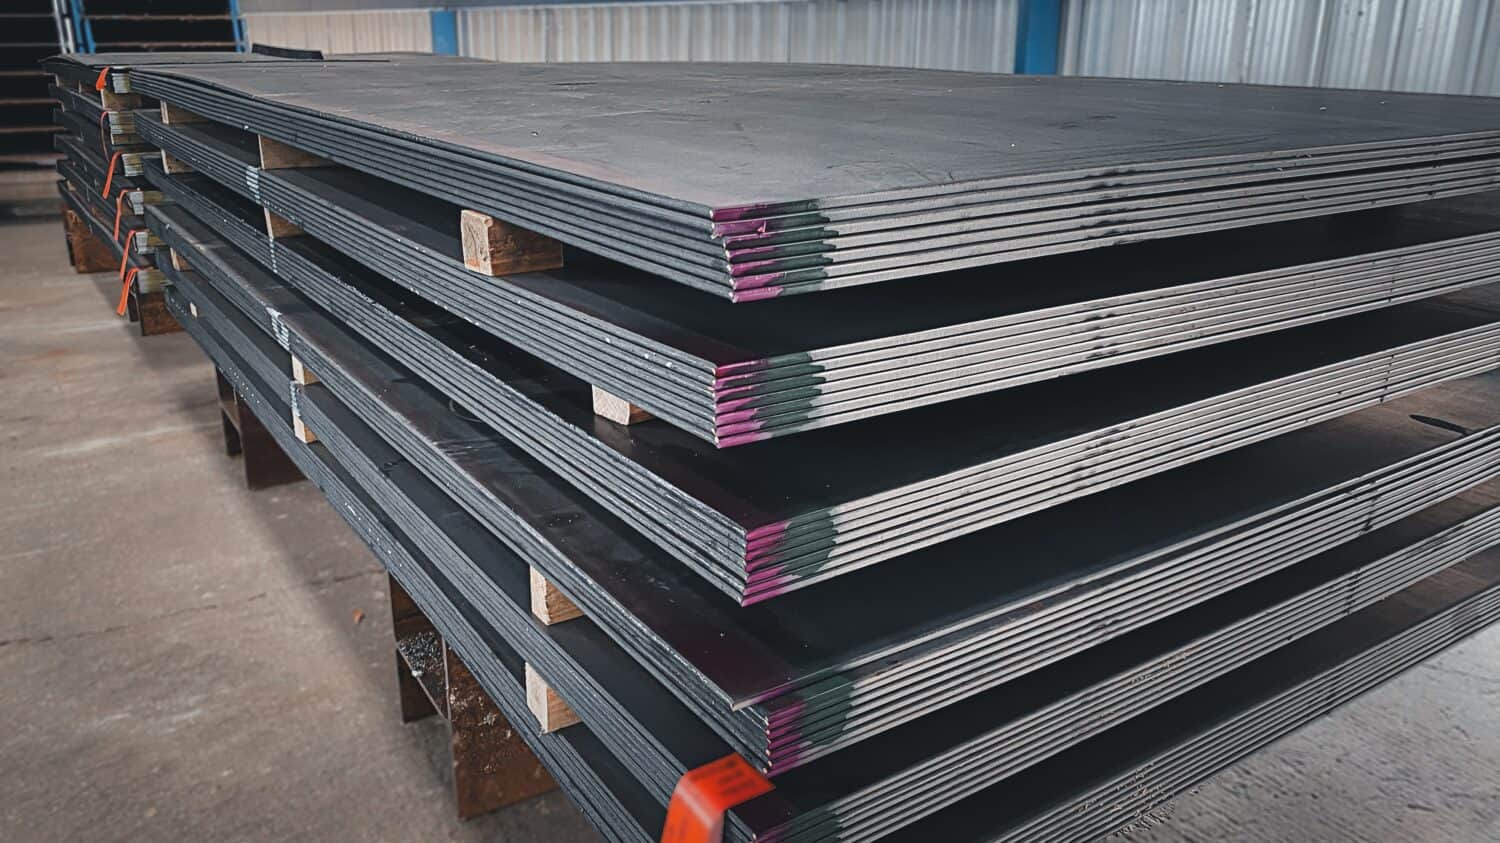 Galvanized steel sheet for background.Group of steel sheets for industrial materials Construction engineering products Factory equipment, pipes metal, industrial warehouse,steel plate structure